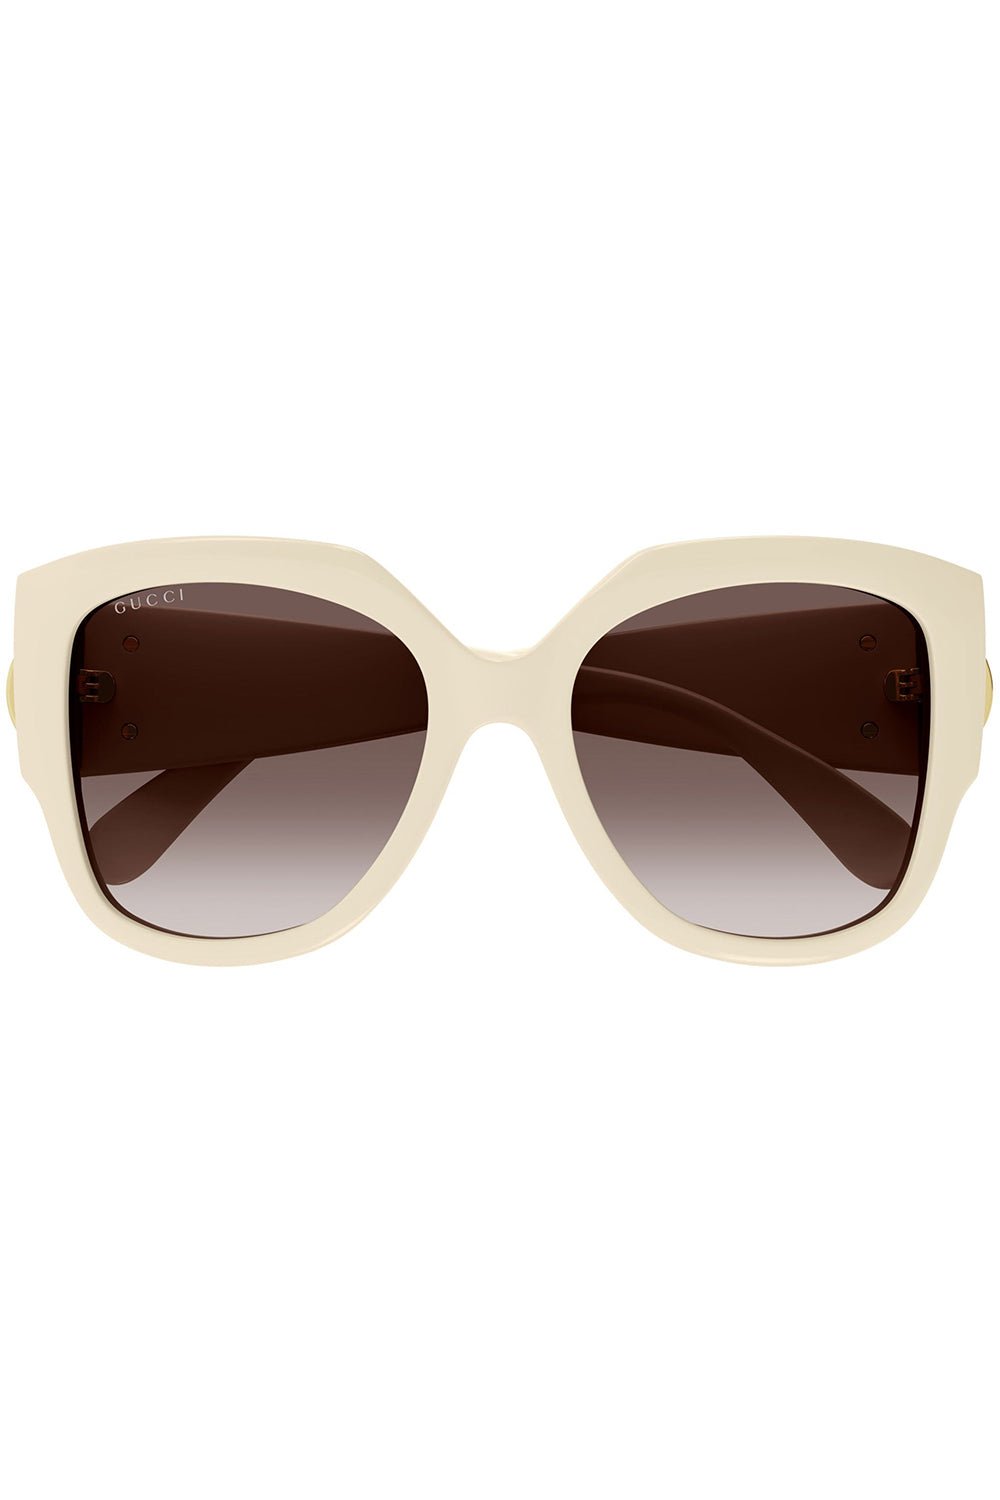 GUCCI-Butterfly Sunglasses-IVORY